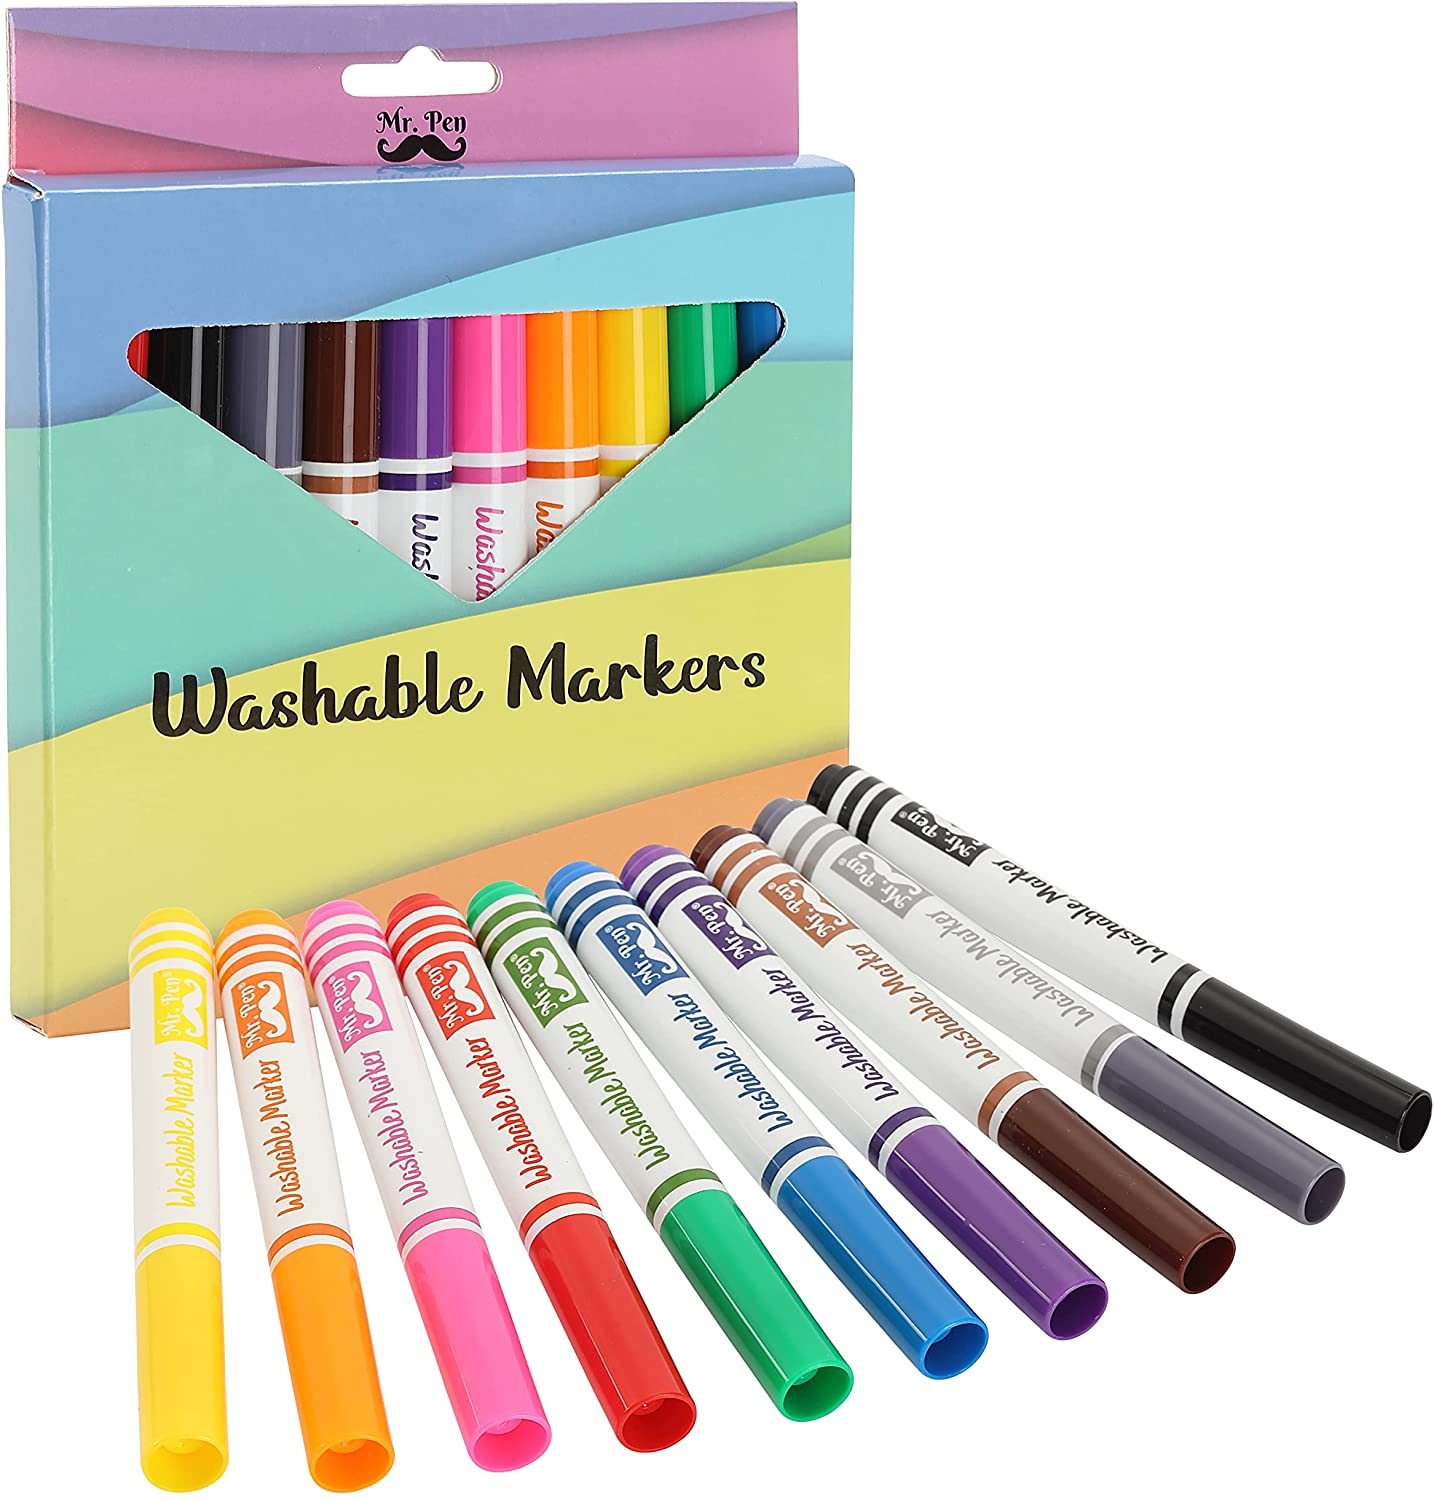  Mr. Pen - 10 Pack of Washable Markers, Assorted